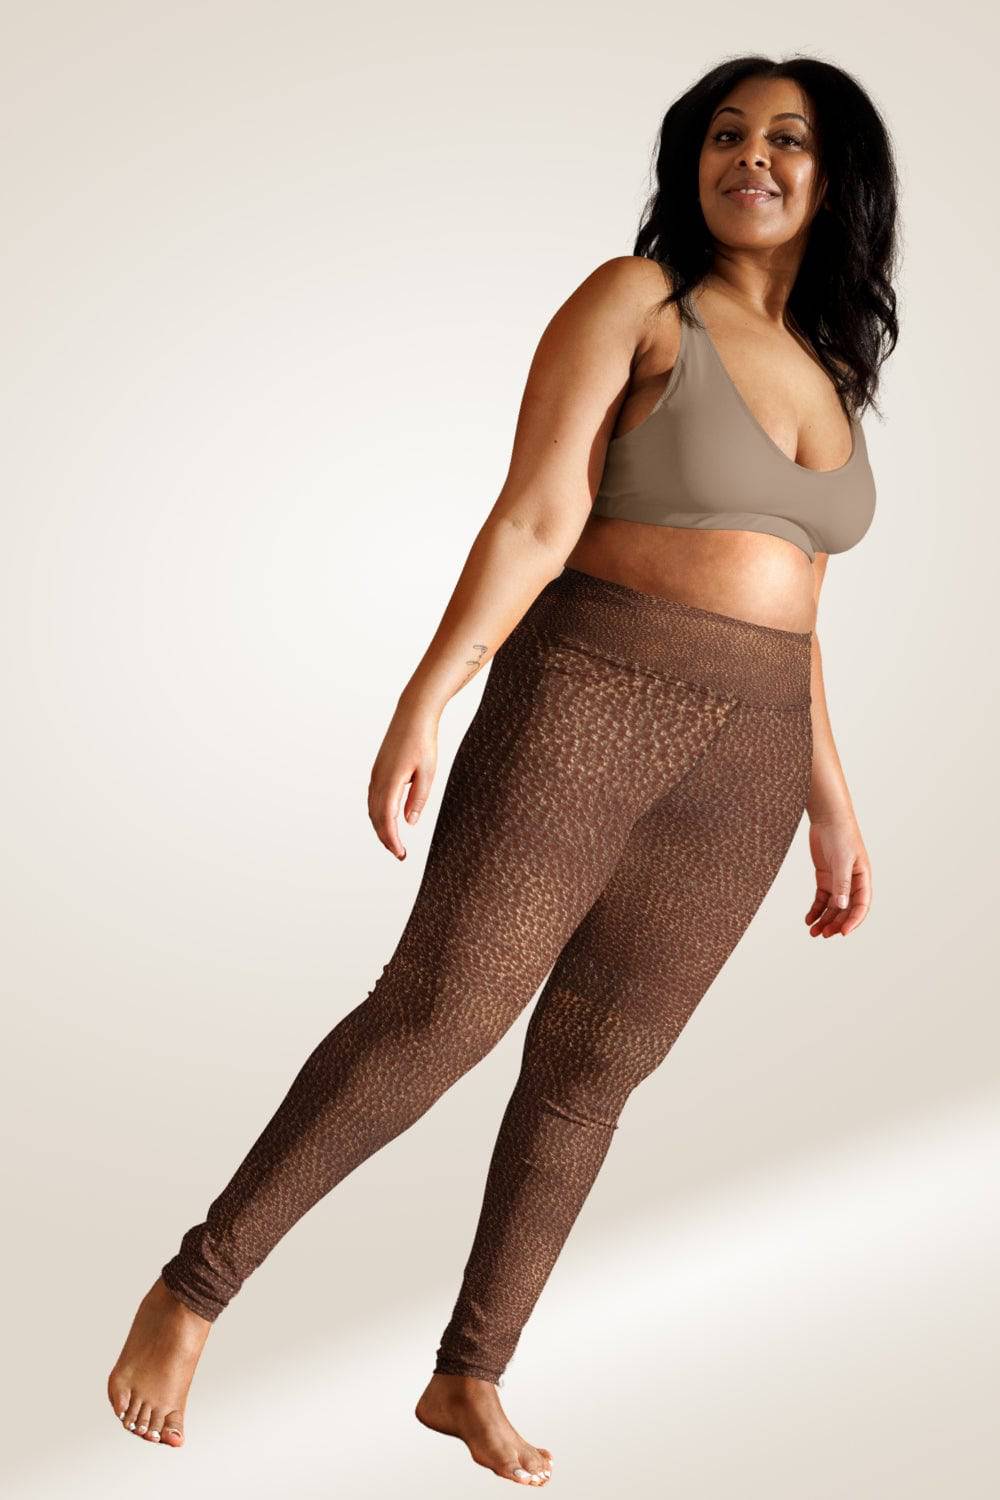 Plus-Size Leather Pants Shopping Guide | 17 Pairs to Shop